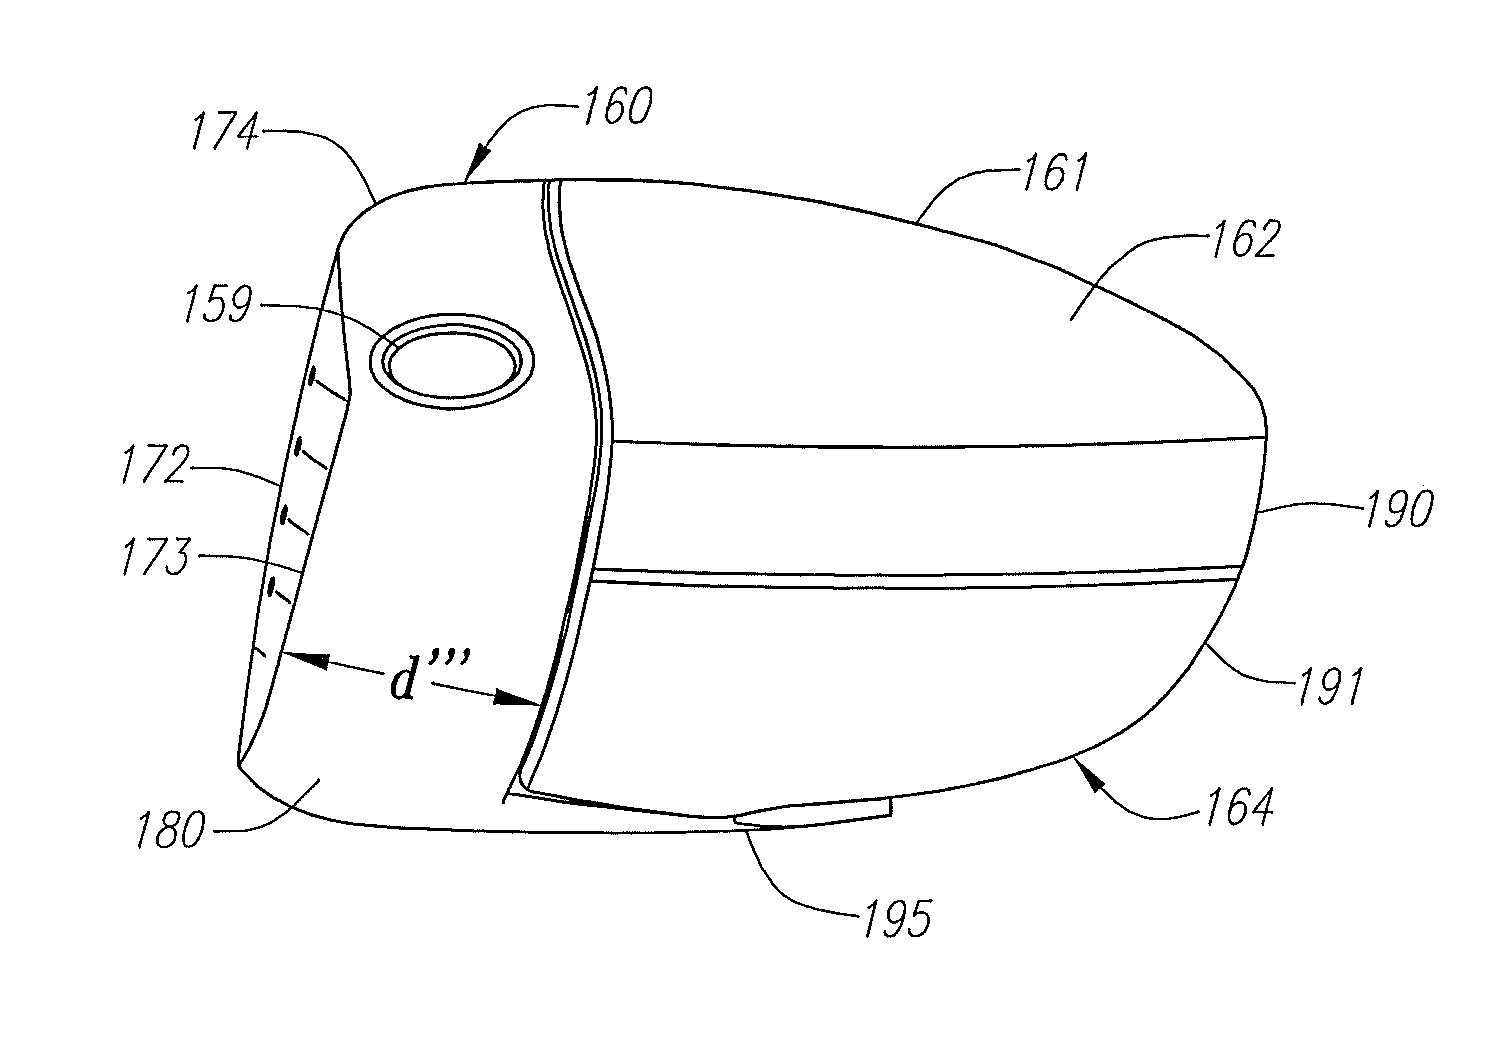 Apparatus and method for manufacturing a multiple material golf club head